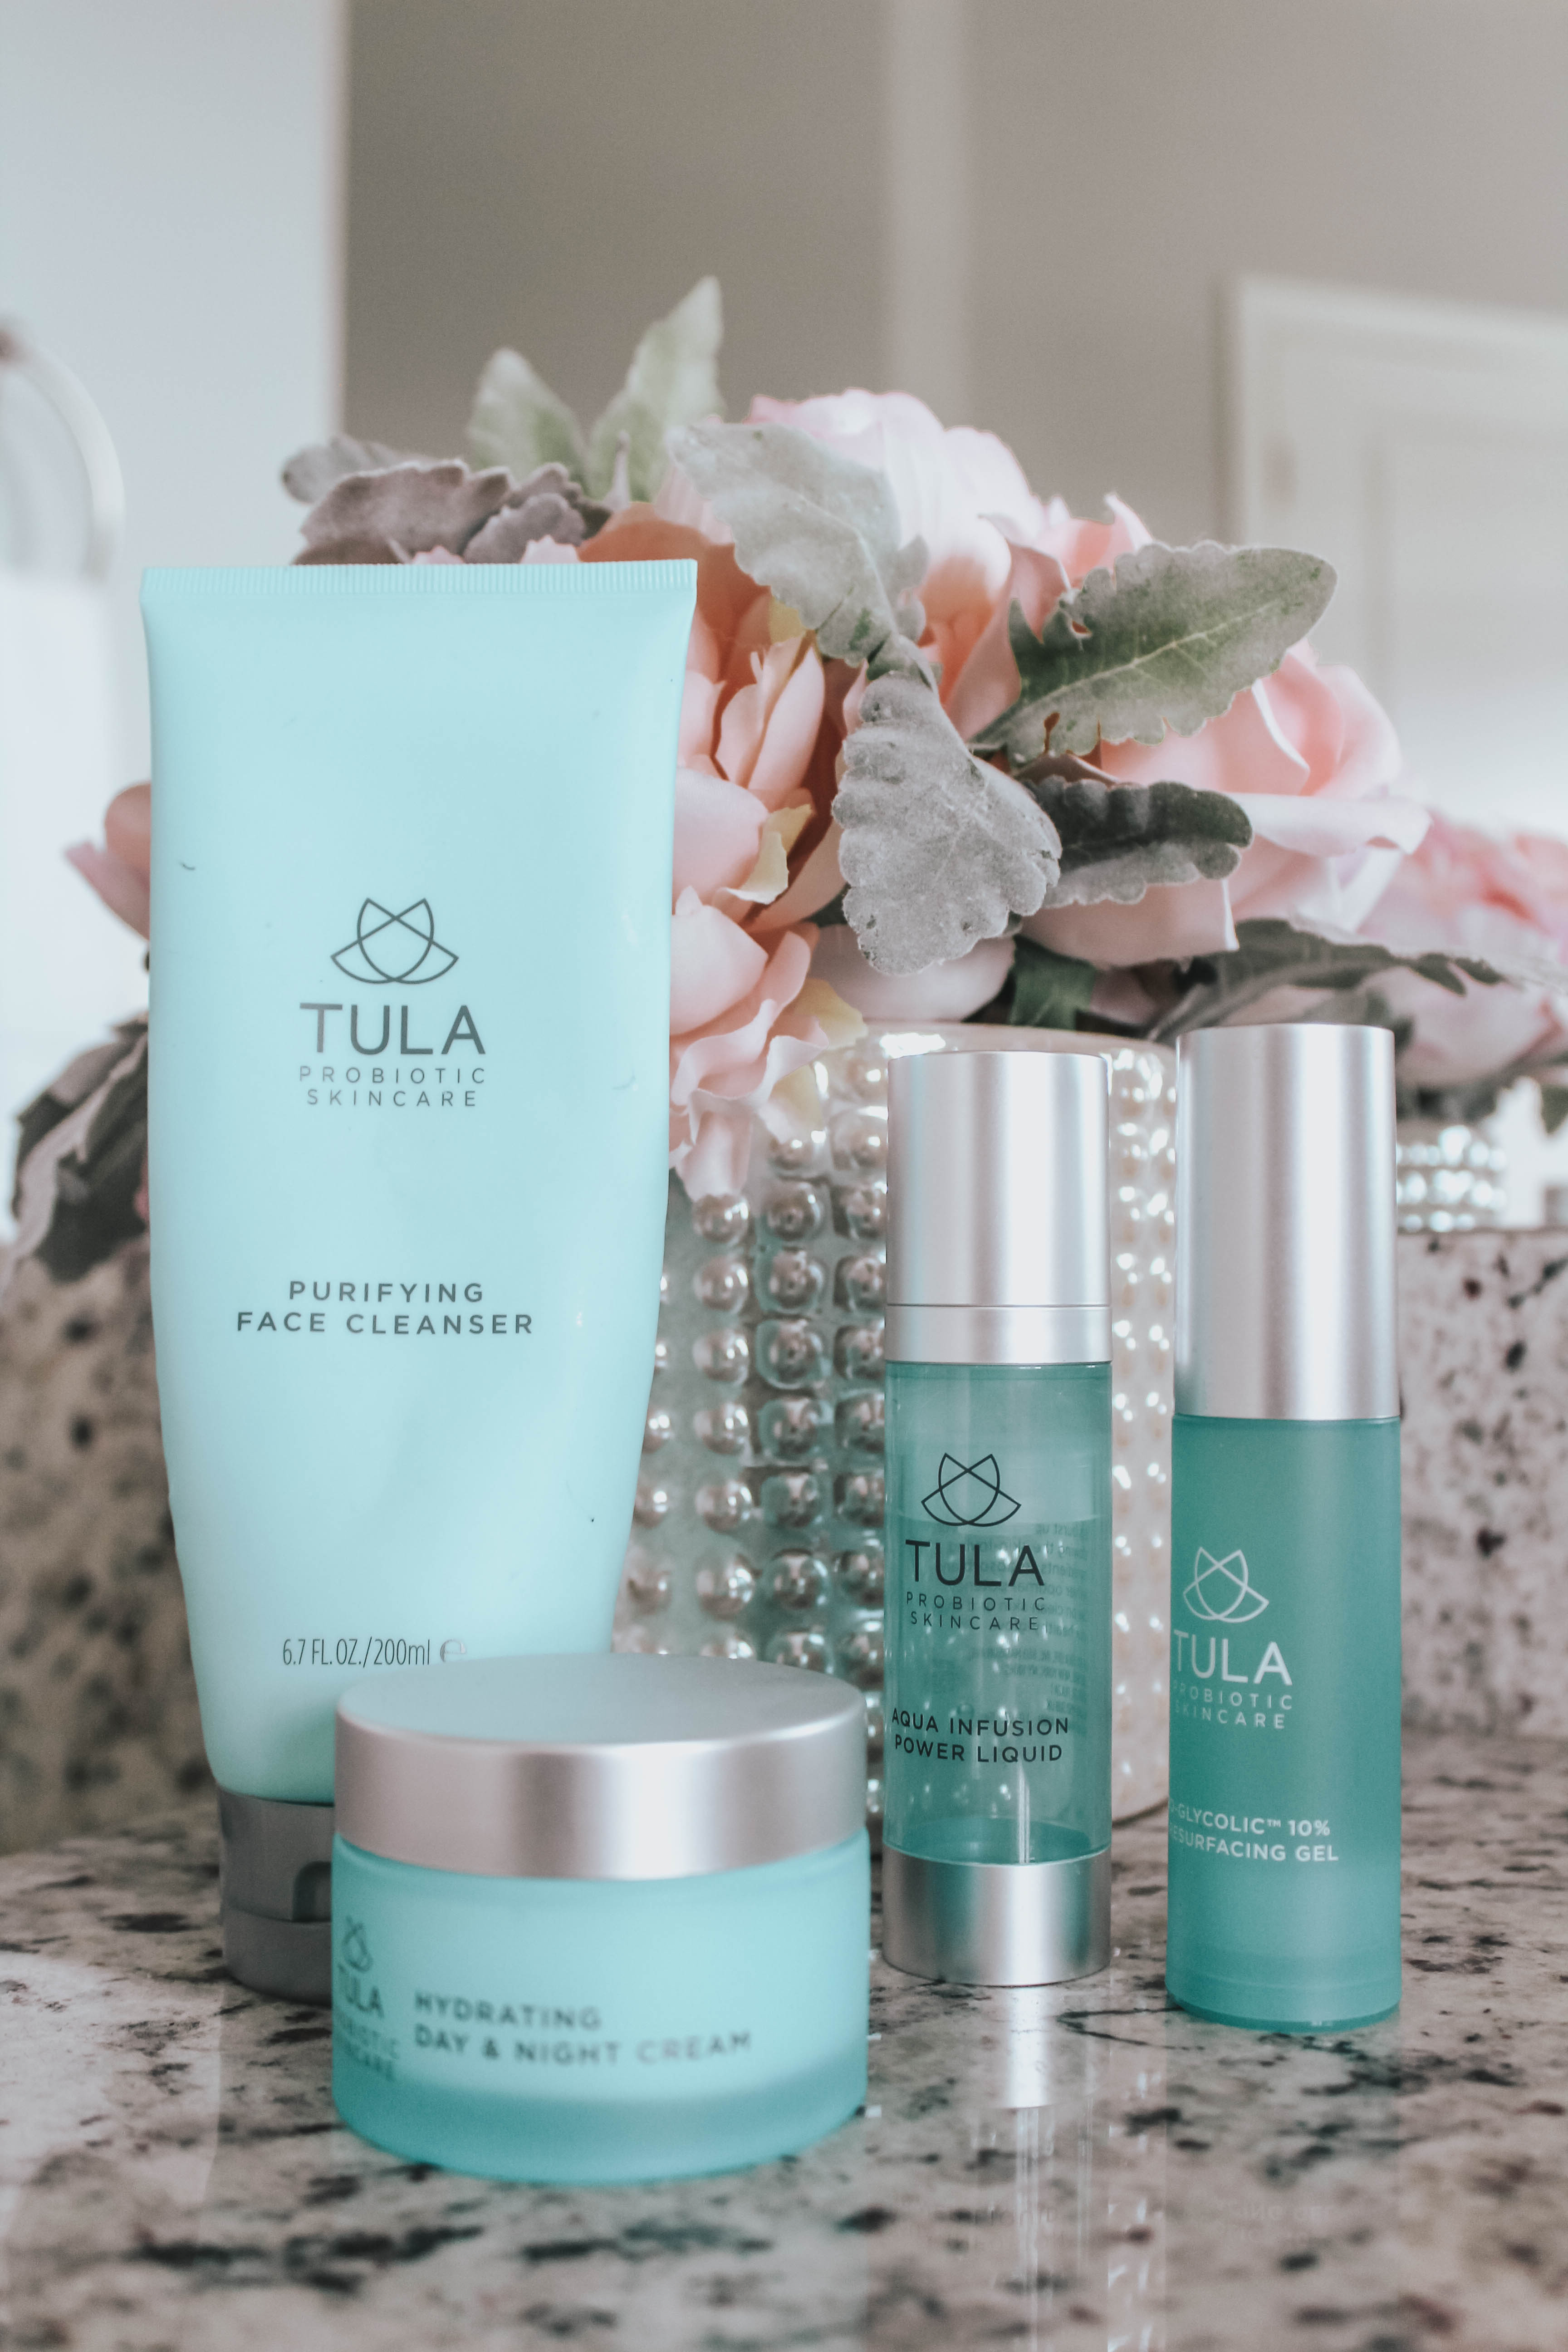 I'm a skincare expert – my everyday device is perfect for